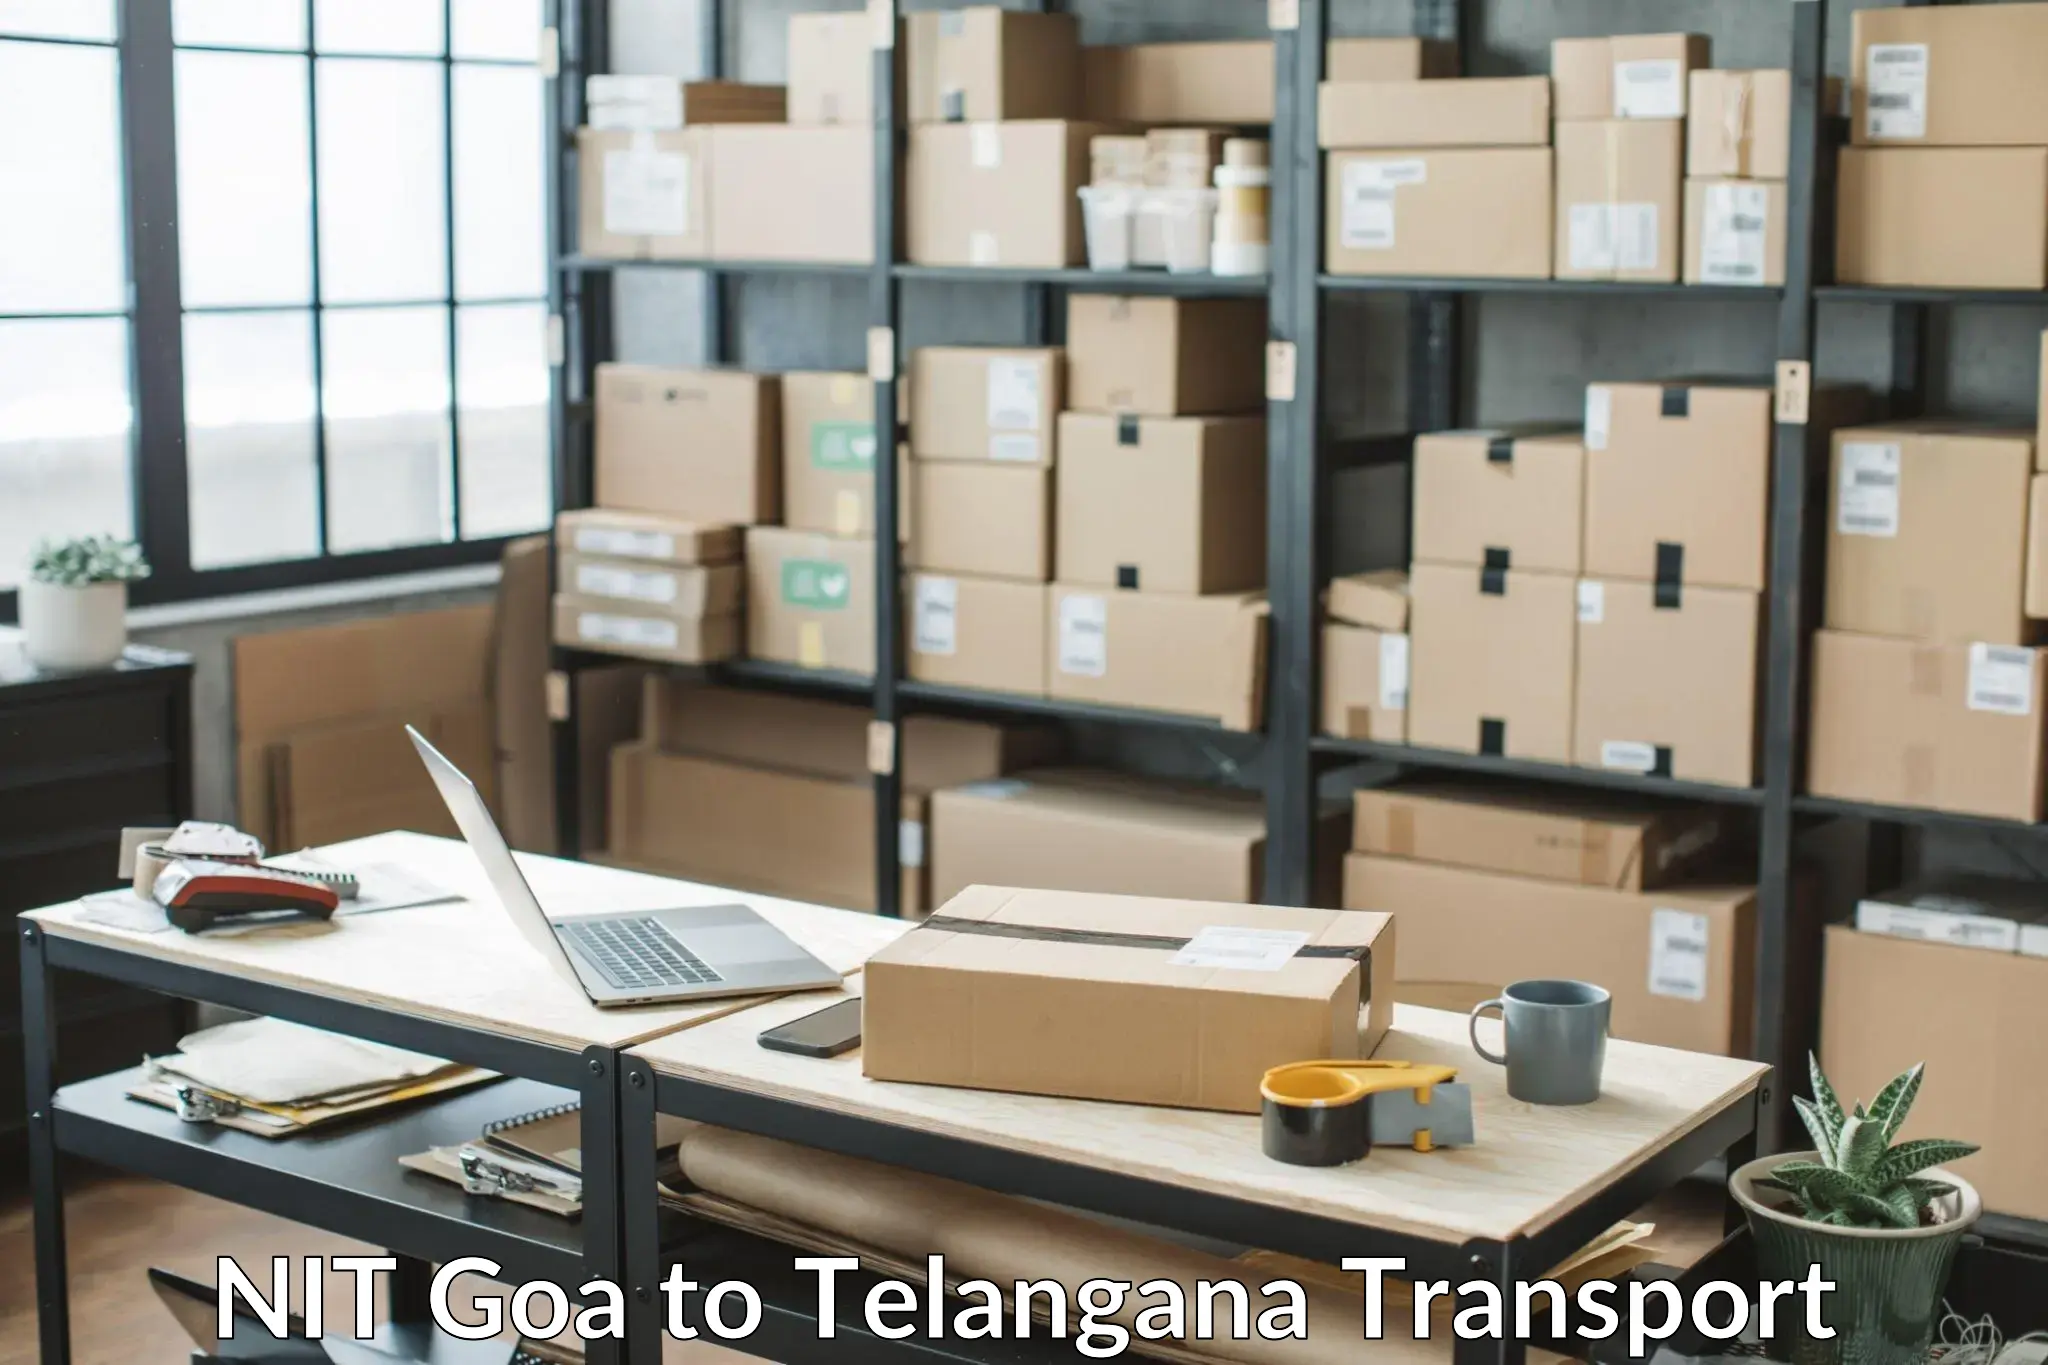 Container transport service in NIT Goa to Cherla